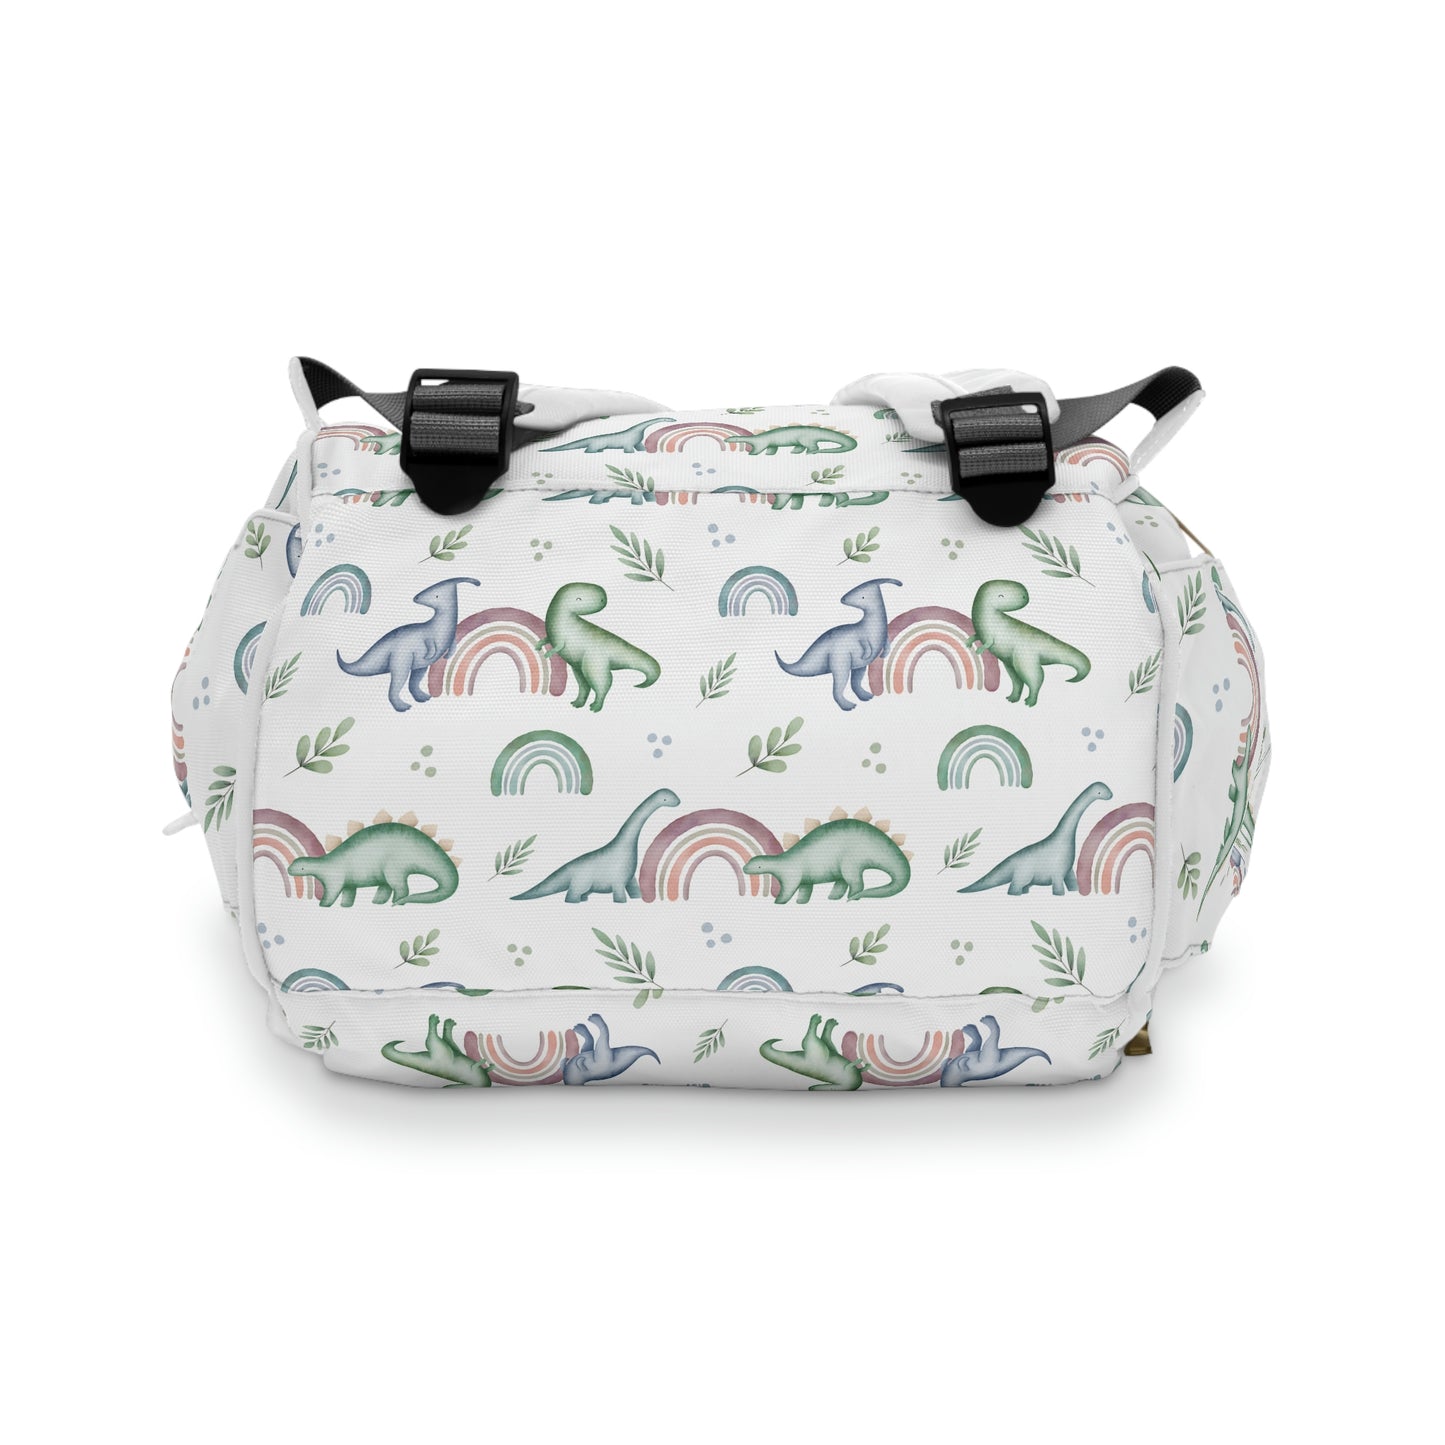 Made to Order - Rainbows and Dinos - Multifunctional Diaper Backpack